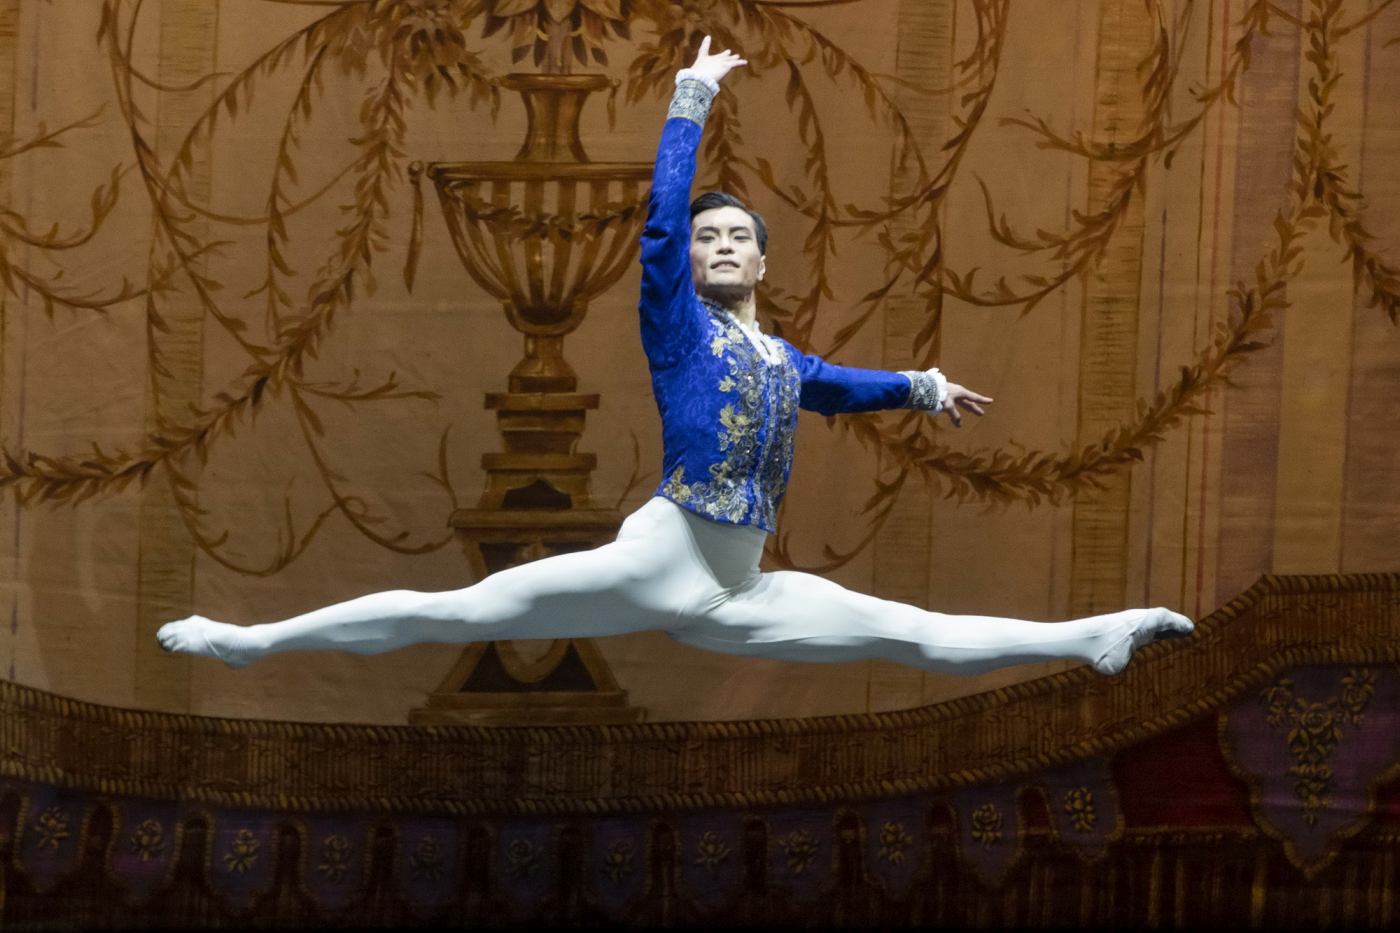 8. R.Morimoto, “Paquita Suite” by T.Solymosi, A.Mirzoyan, and I.Prokofieva after M.Petipa; Ballet of the Hungarian State Opera 2022 © P.Rákossy / Hungarian State Opera 